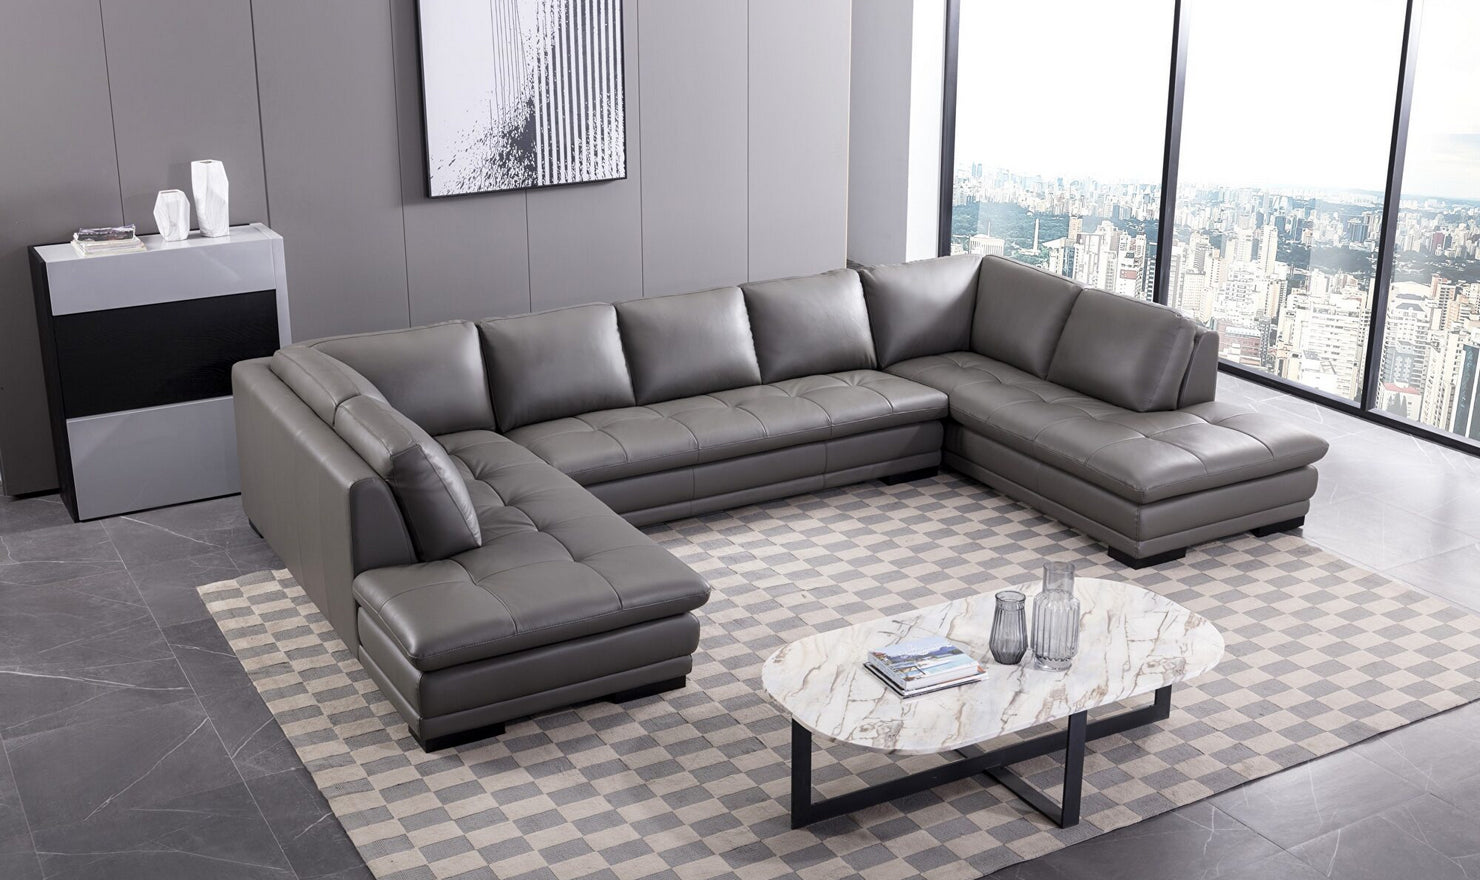 Discover the Hottest Designs and Styles of Sectional Sofas